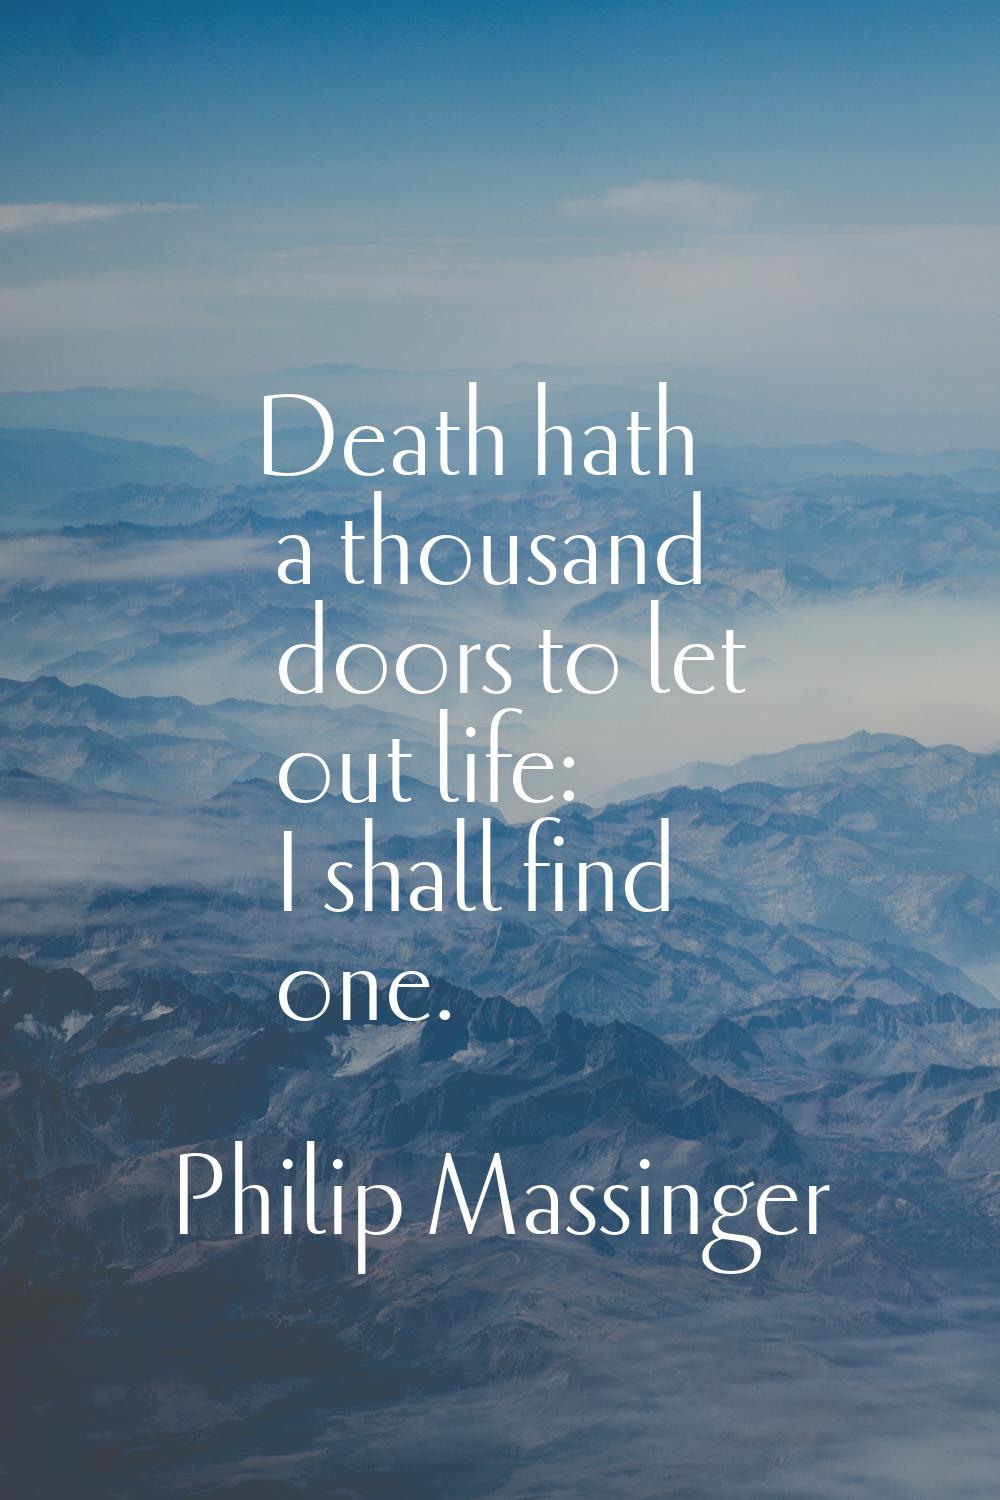 Death hath a thousand doors to let out life: I shall find one.